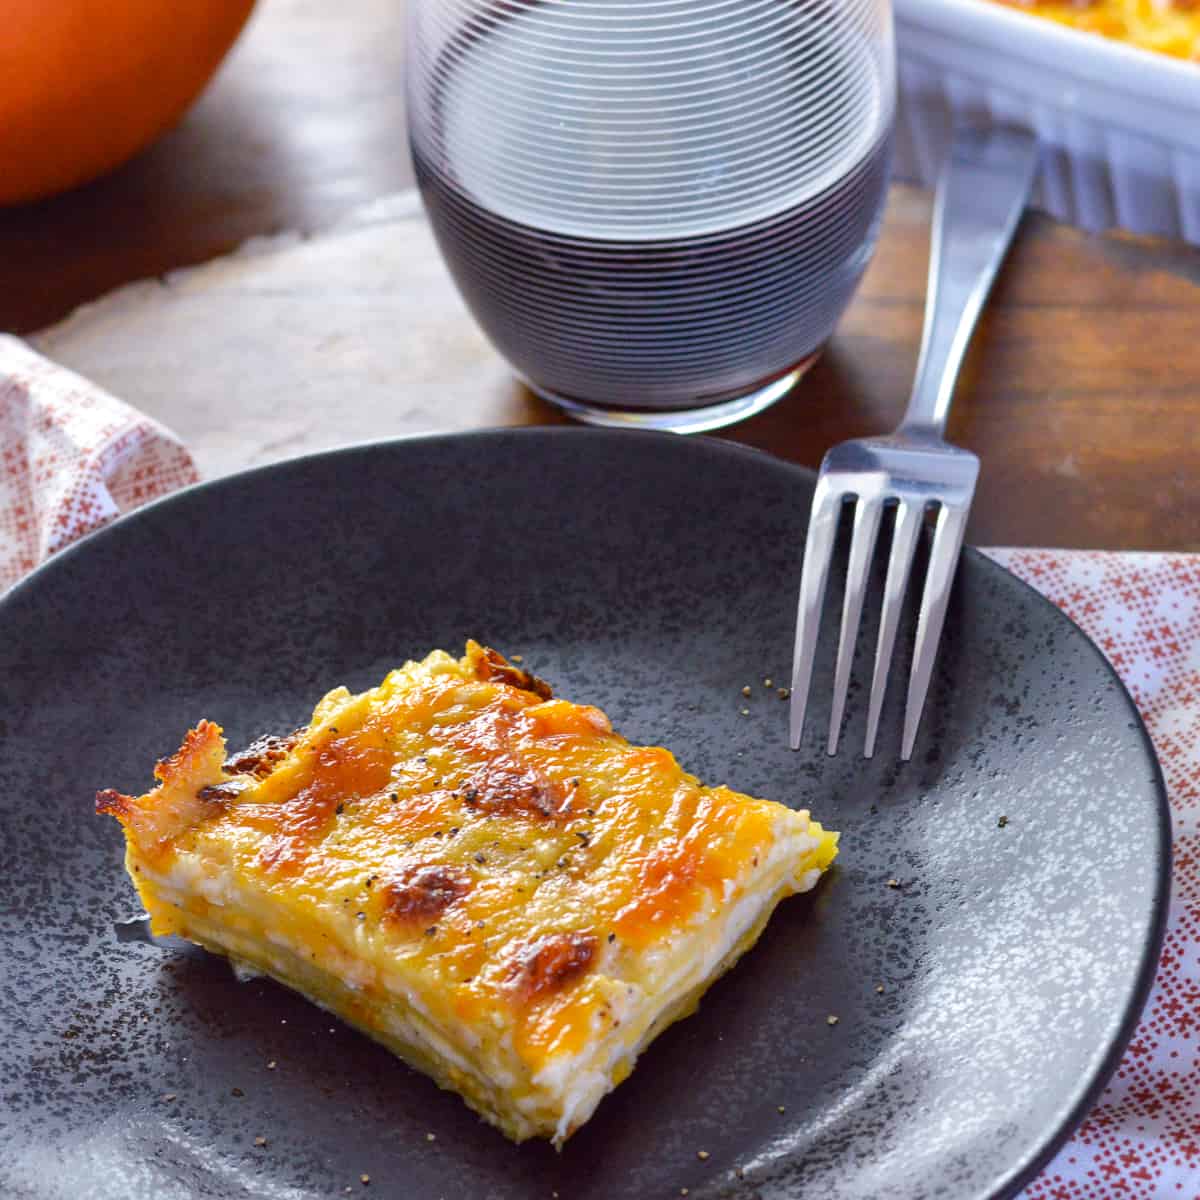 Square of au gratin dauphinoise potatoes on black plate with pumpkin, red wine and casserole dish with au gratin in background